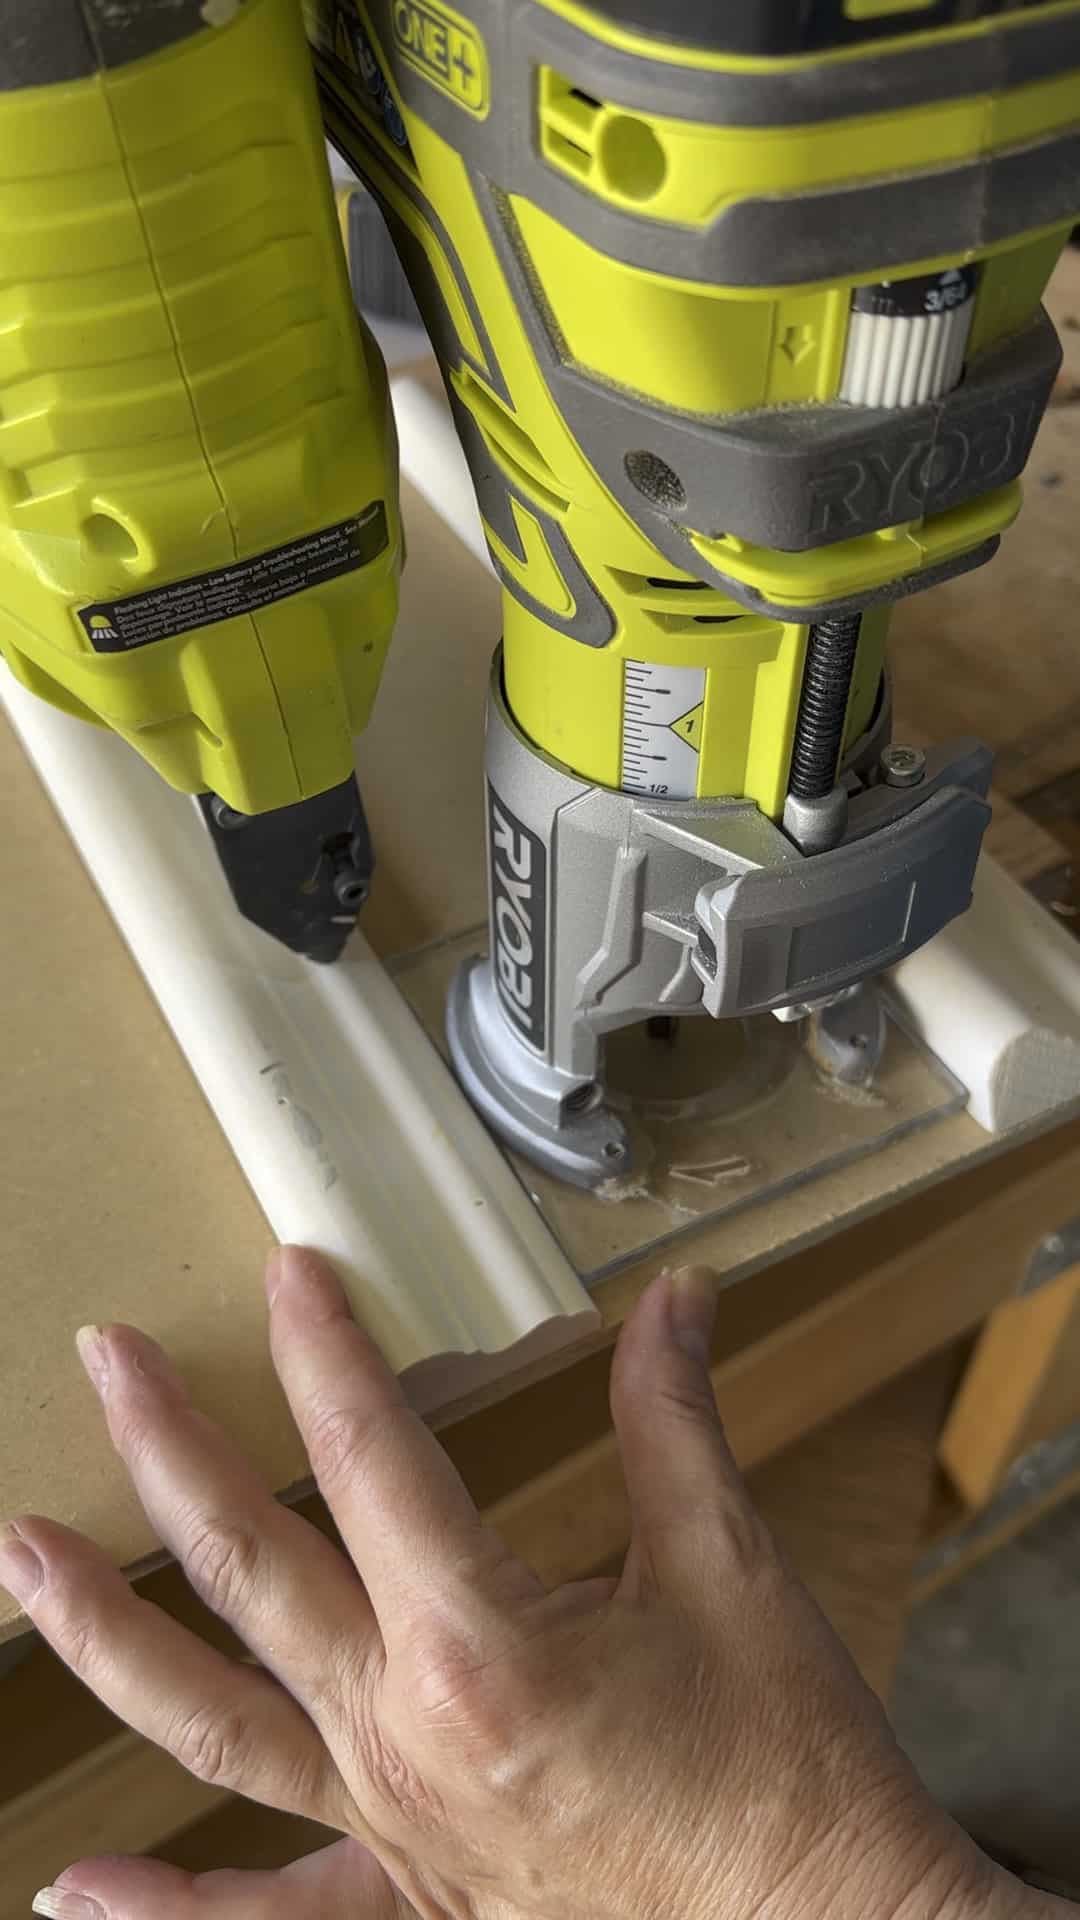 build a router jig for center of board